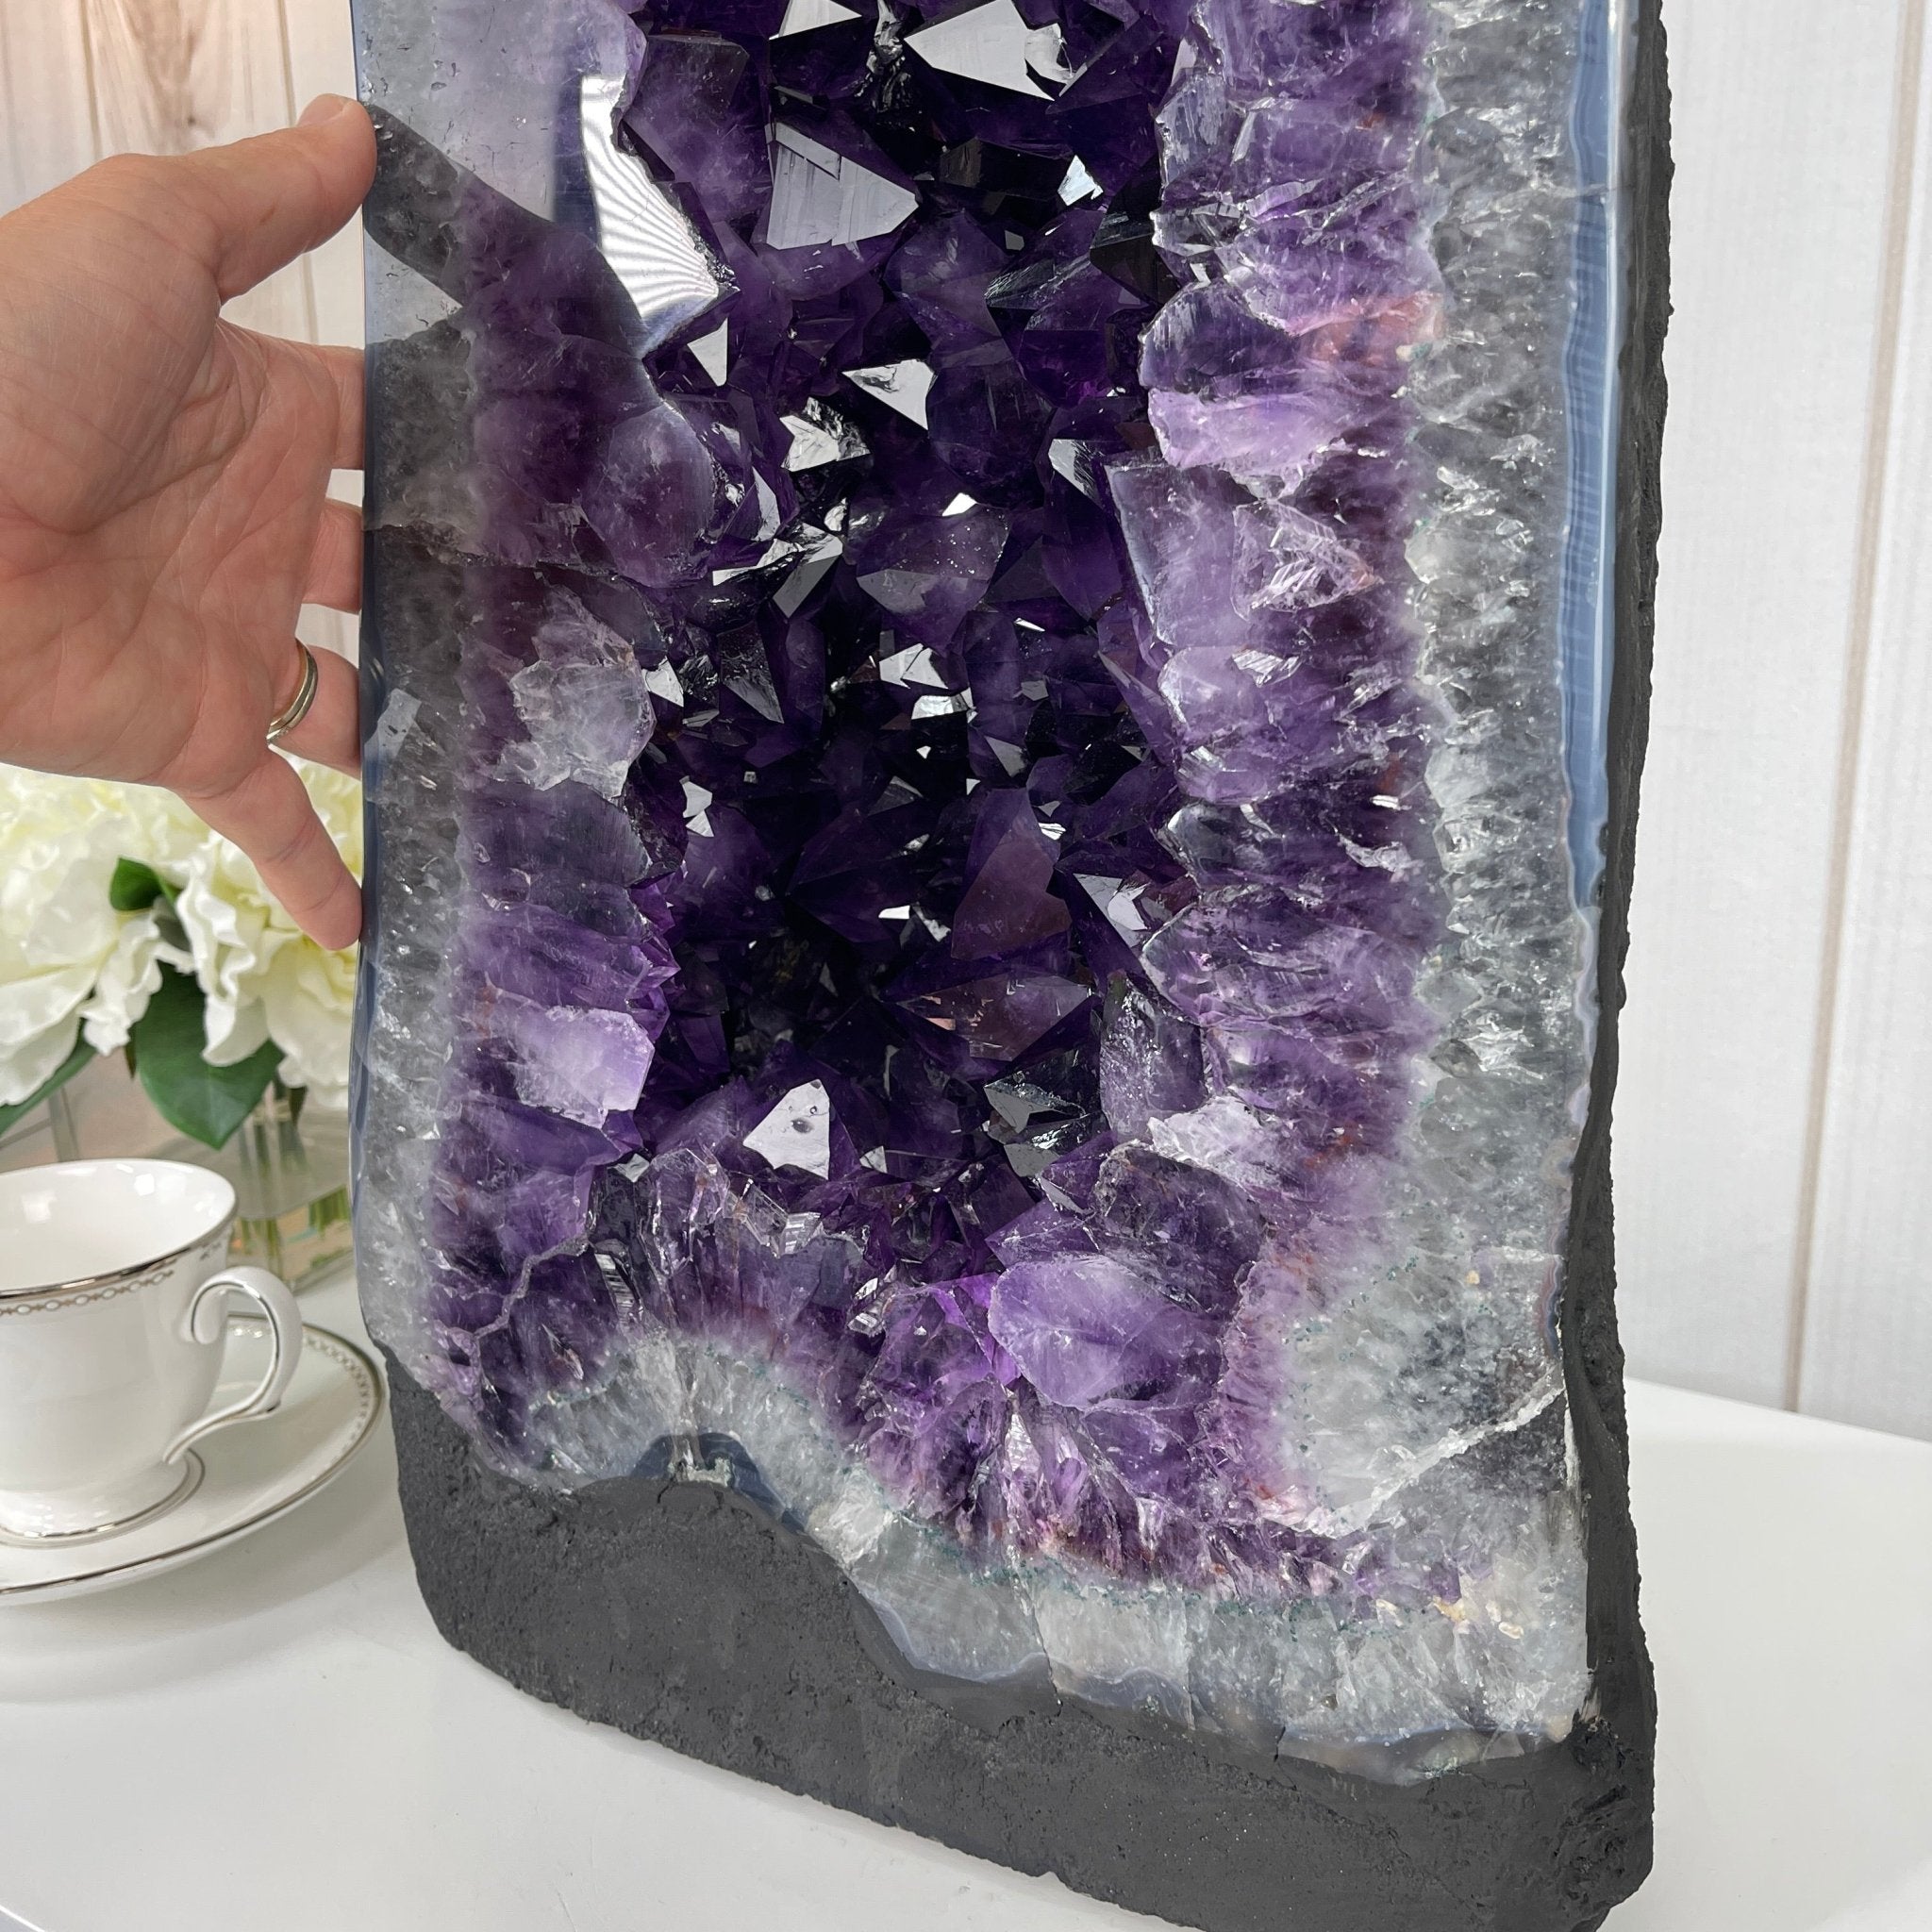 Super Quality Brazilian Amethyst Cathedral, 24.5” tall & 86 lbs #5601-0494 by Brazil Gems - Brazil GemsBrazil GemsSuper Quality Brazilian Amethyst Cathedral, 24.5” tall & 86 lbs #5601-0494 by Brazil GemsCathedrals5601-0494